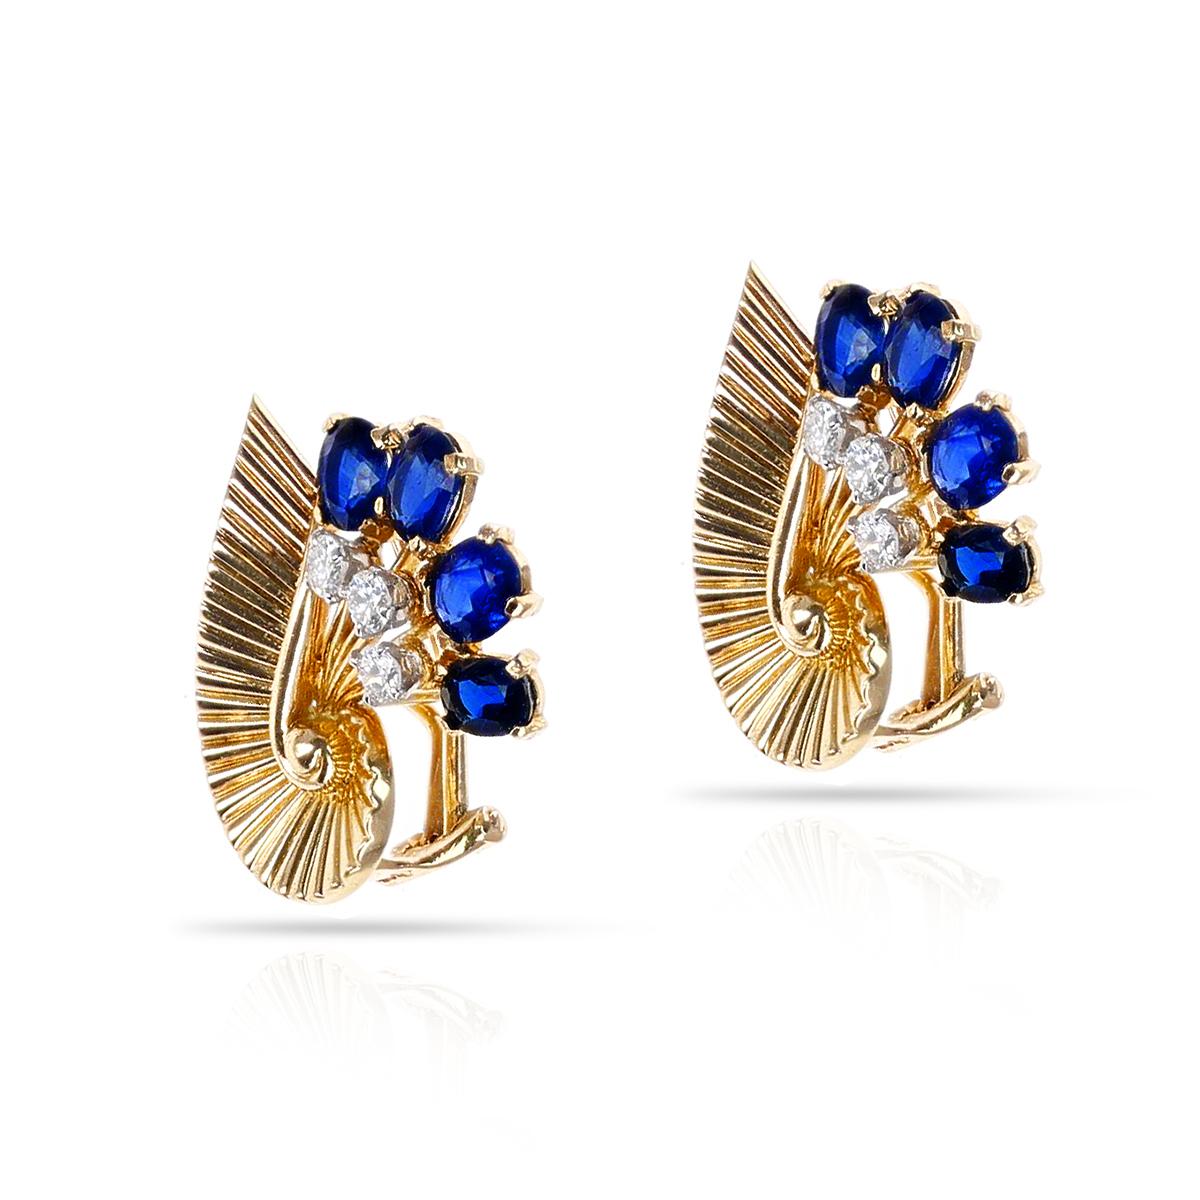 Retro 1965 Cartier Paris Natural Sapphire and Diamond 18K Yellow Gold Earrings For Sale